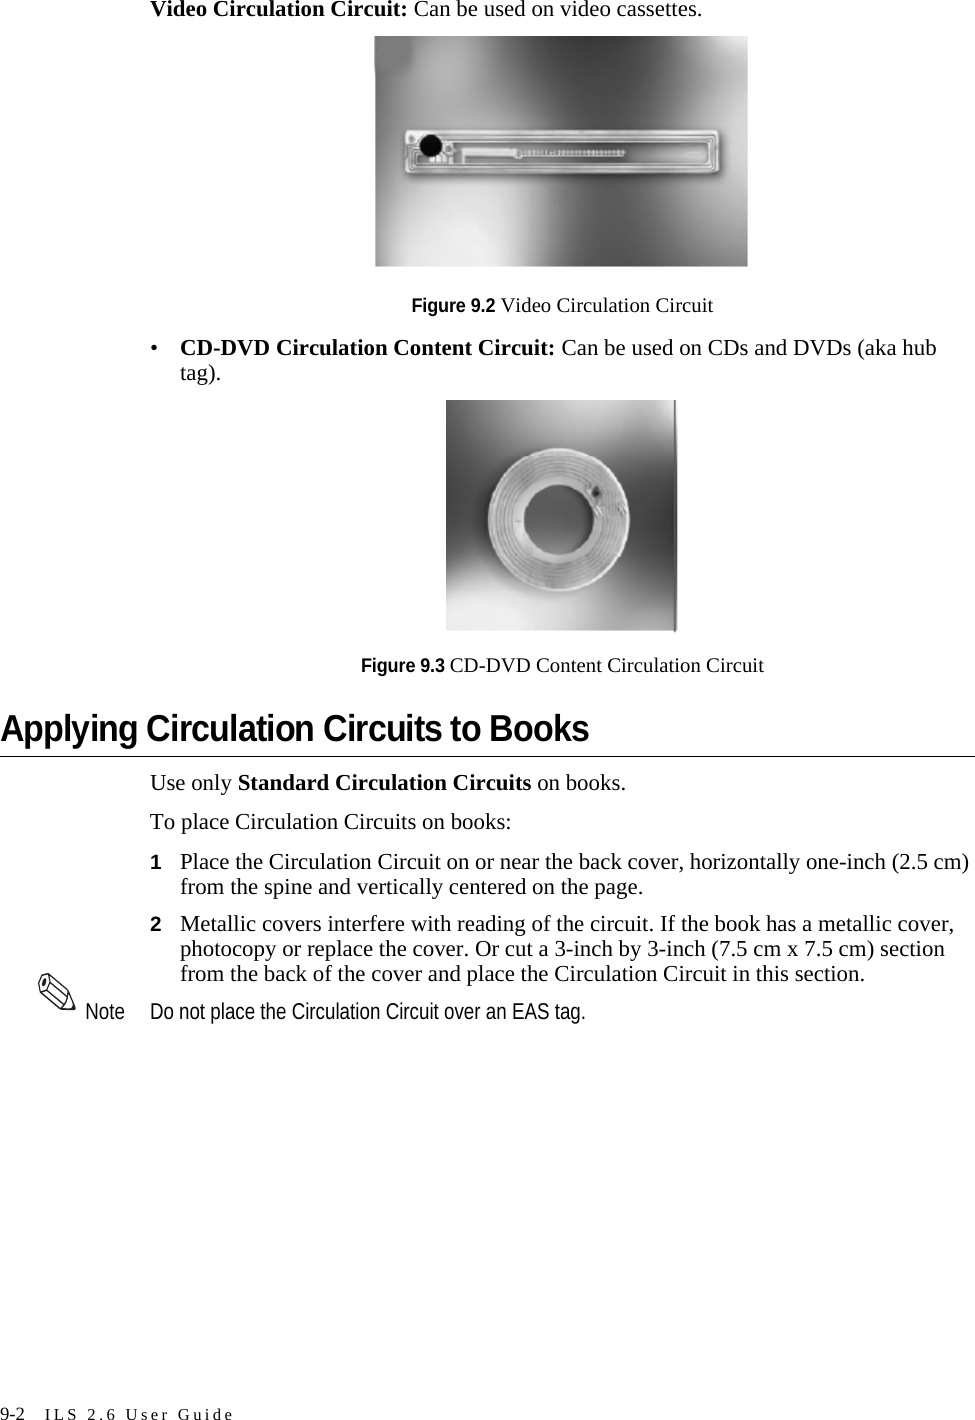 9-2 ILS 2.6 User GuideVideo Circulation Circuit: Can be used on video cassettes.Figure 9.2 Video Circulation Circuit•CD-DVD Circulation Content Circuit: Can be used on CDs and DVDs (aka hub tag).Figure 9.3 CD-DVD Content Circulation CircuitApplying Circulation Circuits to BooksUse only Standard Circulation Circuits on books.To place Circulation Circuits on books:1Place the Circulation Circuit on or near the back cover, horizontally one-inch (2.5 cm) from the spine and vertically centered on the page.2Metallic covers interfere with reading of the circuit. If the book has a metallic cover, photocopy or replace the cover. Or cut a 3-inch by 3-inch (7.5 cm x 7.5 cm) section from the back of the cover and place the Circulation Circuit in this section.Note Do not place the Circulation Circuit over an EAS tag.